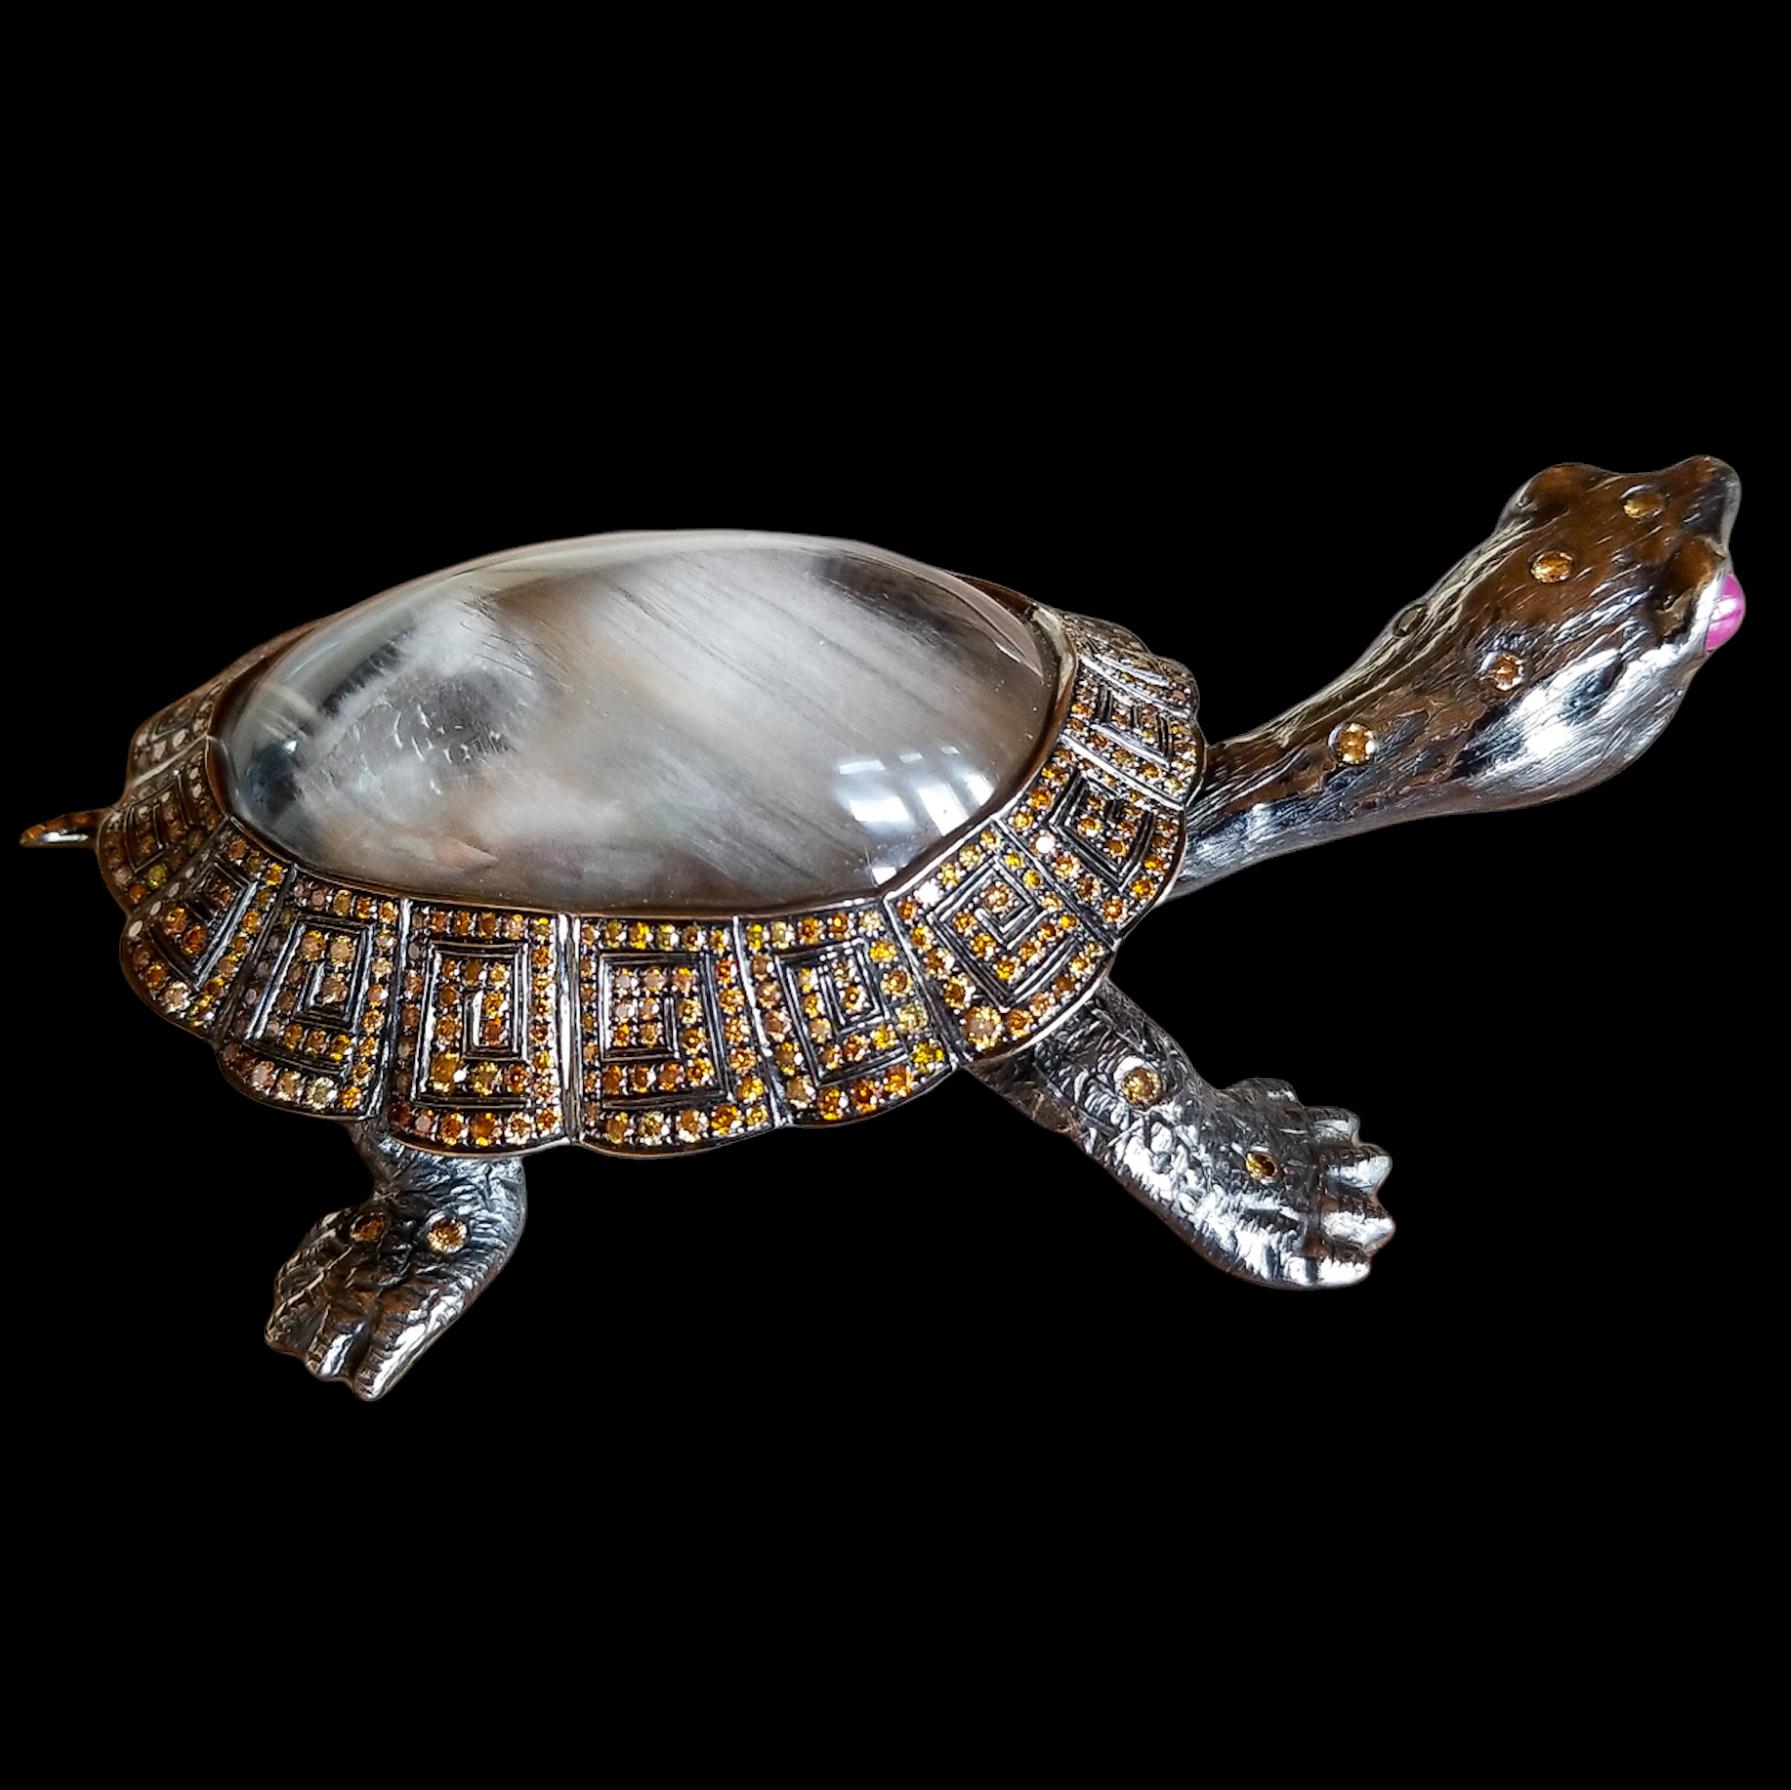 Unique.
One of a Kind Collection Piece of High Jewelry/Objet d'art.
The ultimate extravagant gift for the Collector and Lover of Nature. 
Jeweled Turtle Figurine of lifesize proportion and intricate 360 degree detail in Solid 18K Gold of over 61